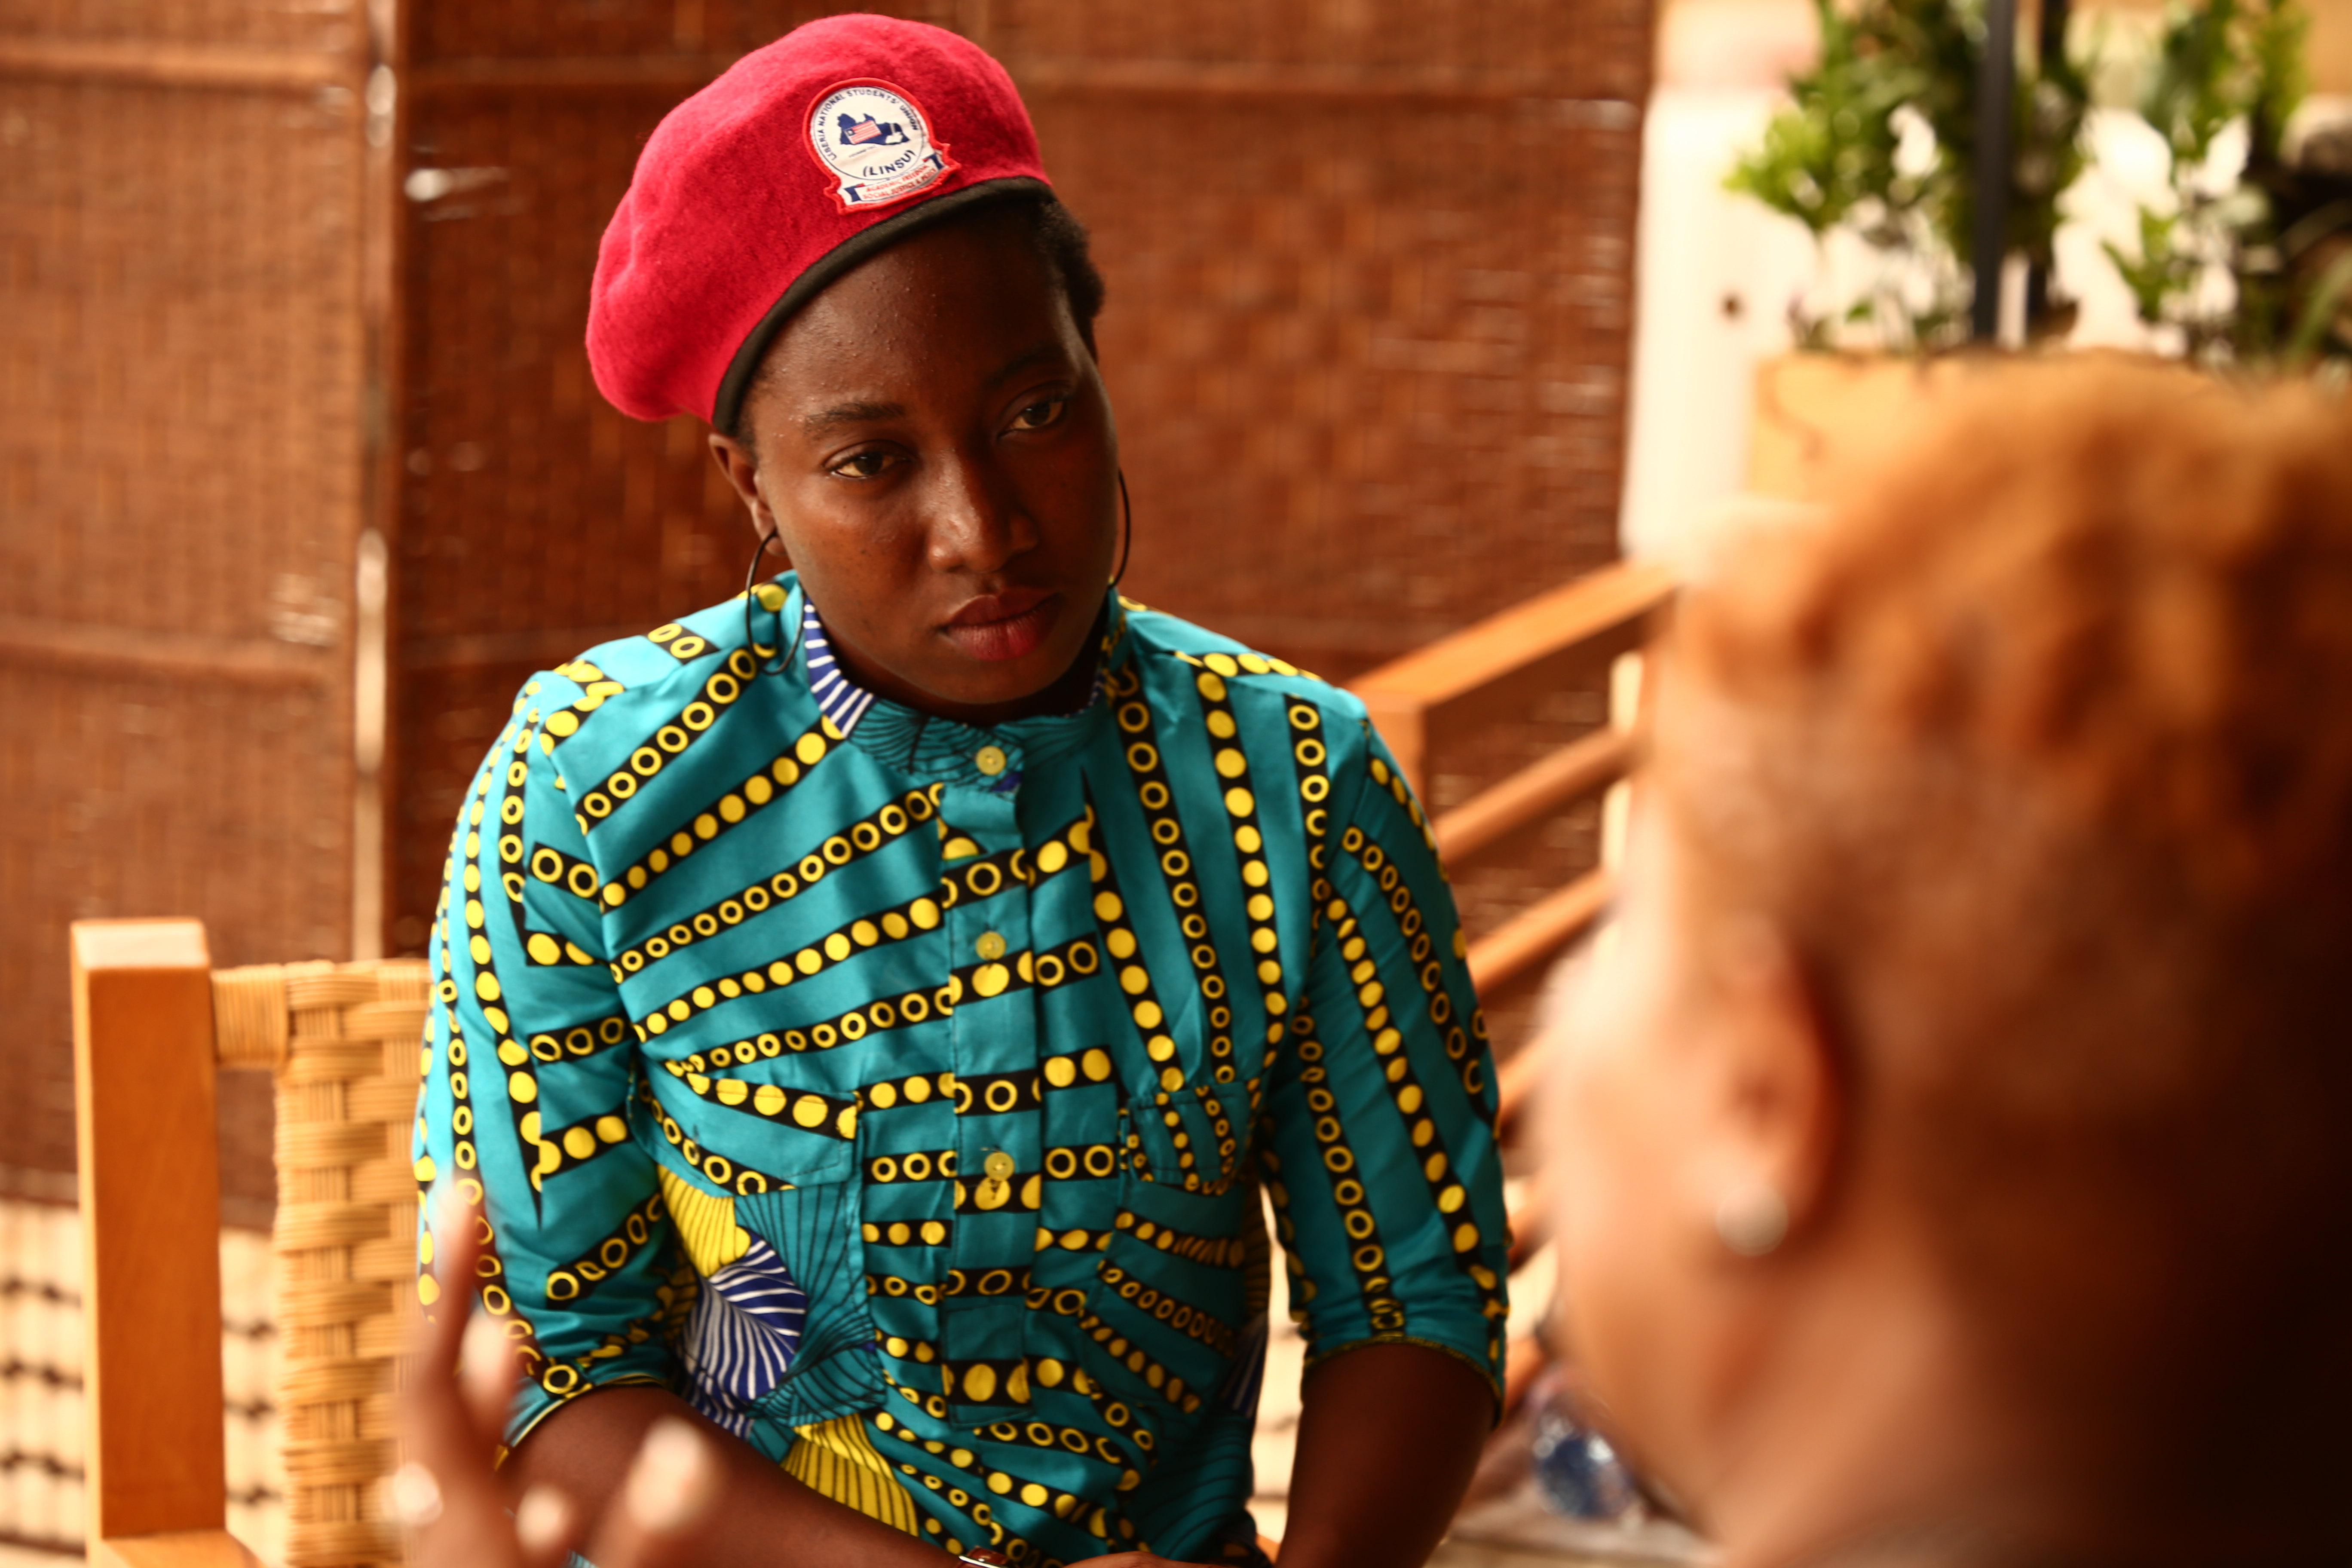 Vickjune Wutoh, Vice President of the Liberian National Students Union and youth activist interviews Tonieh Talery Wiles, a Commissioner at the Independent National Commission on Human Rights. Photo: UN Women, Liberia